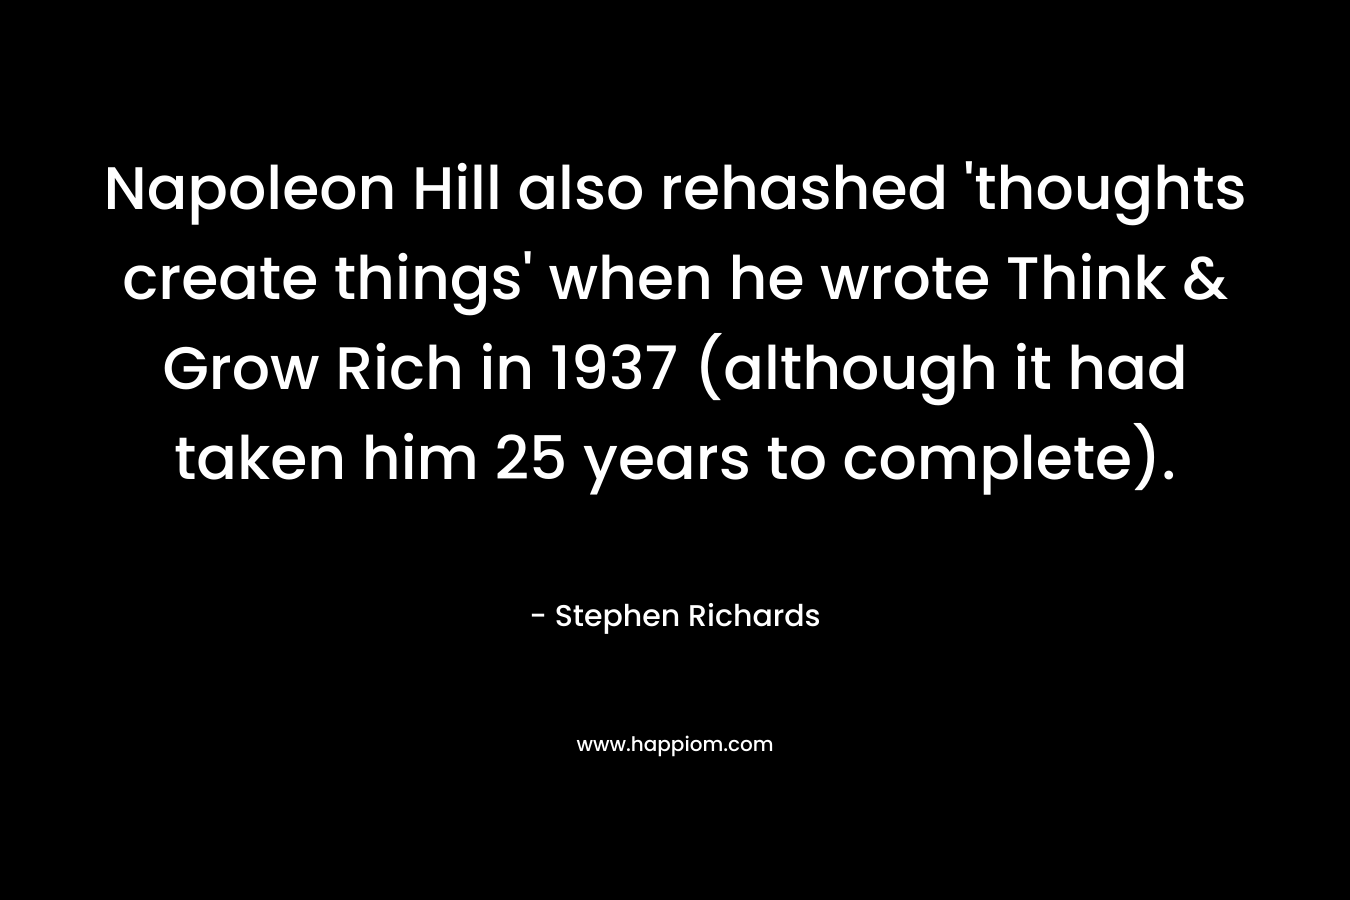 Napoleon Hill also rehashed ‘thoughts create things’ when he wrote Think & Grow Rich in 1937 (although it had taken him 25 years to complete). – Stephen Richards